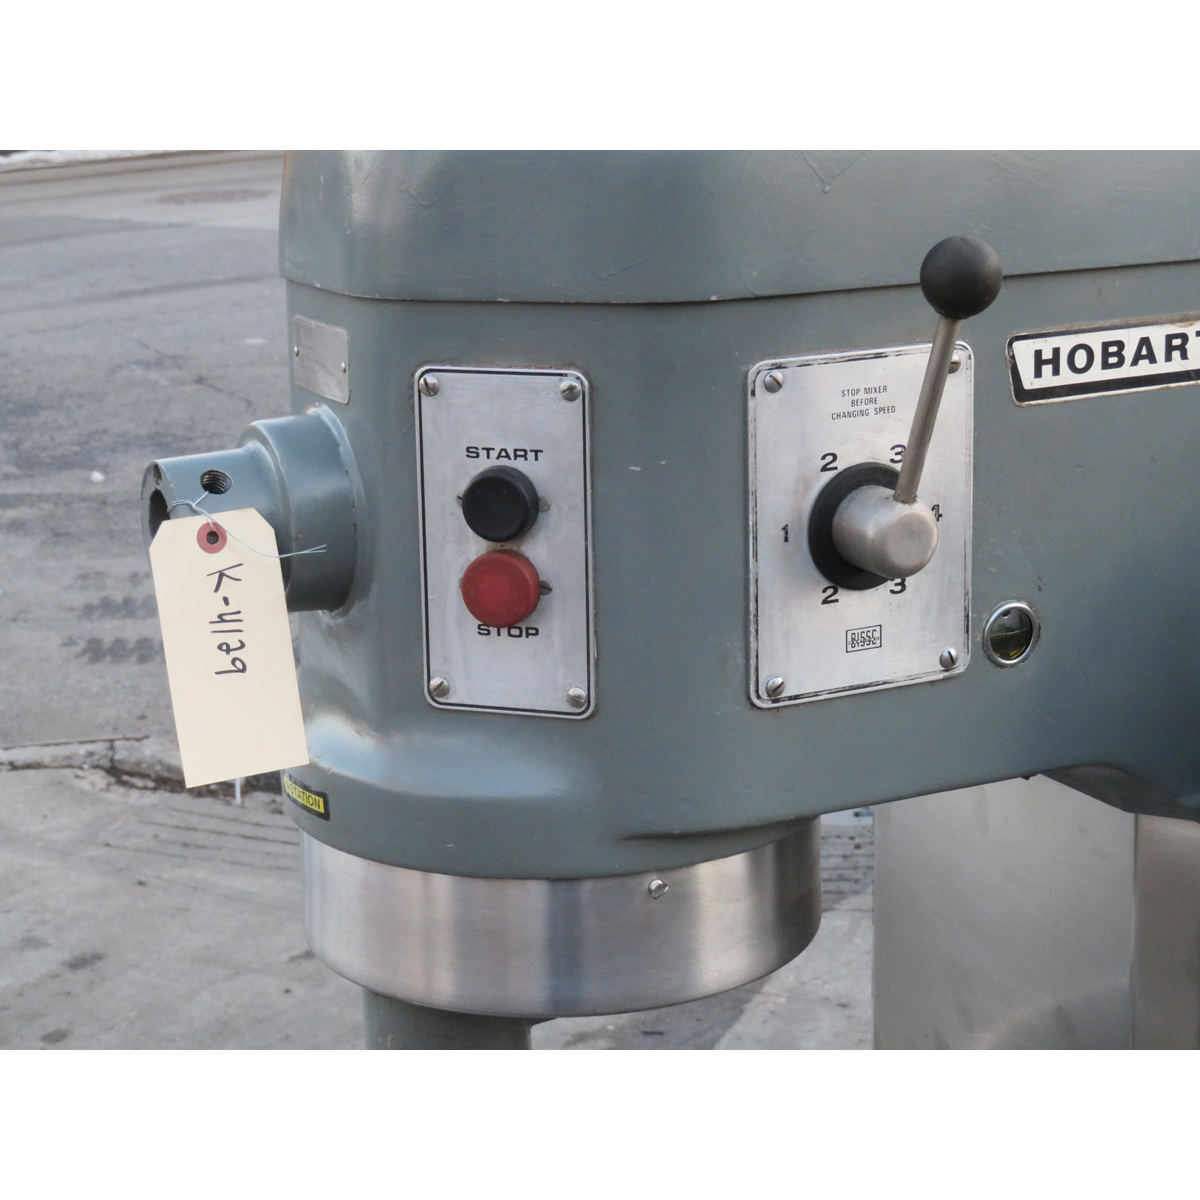 Hobart 60 Quart H600 Mixer, Used Excellent Condition image 3